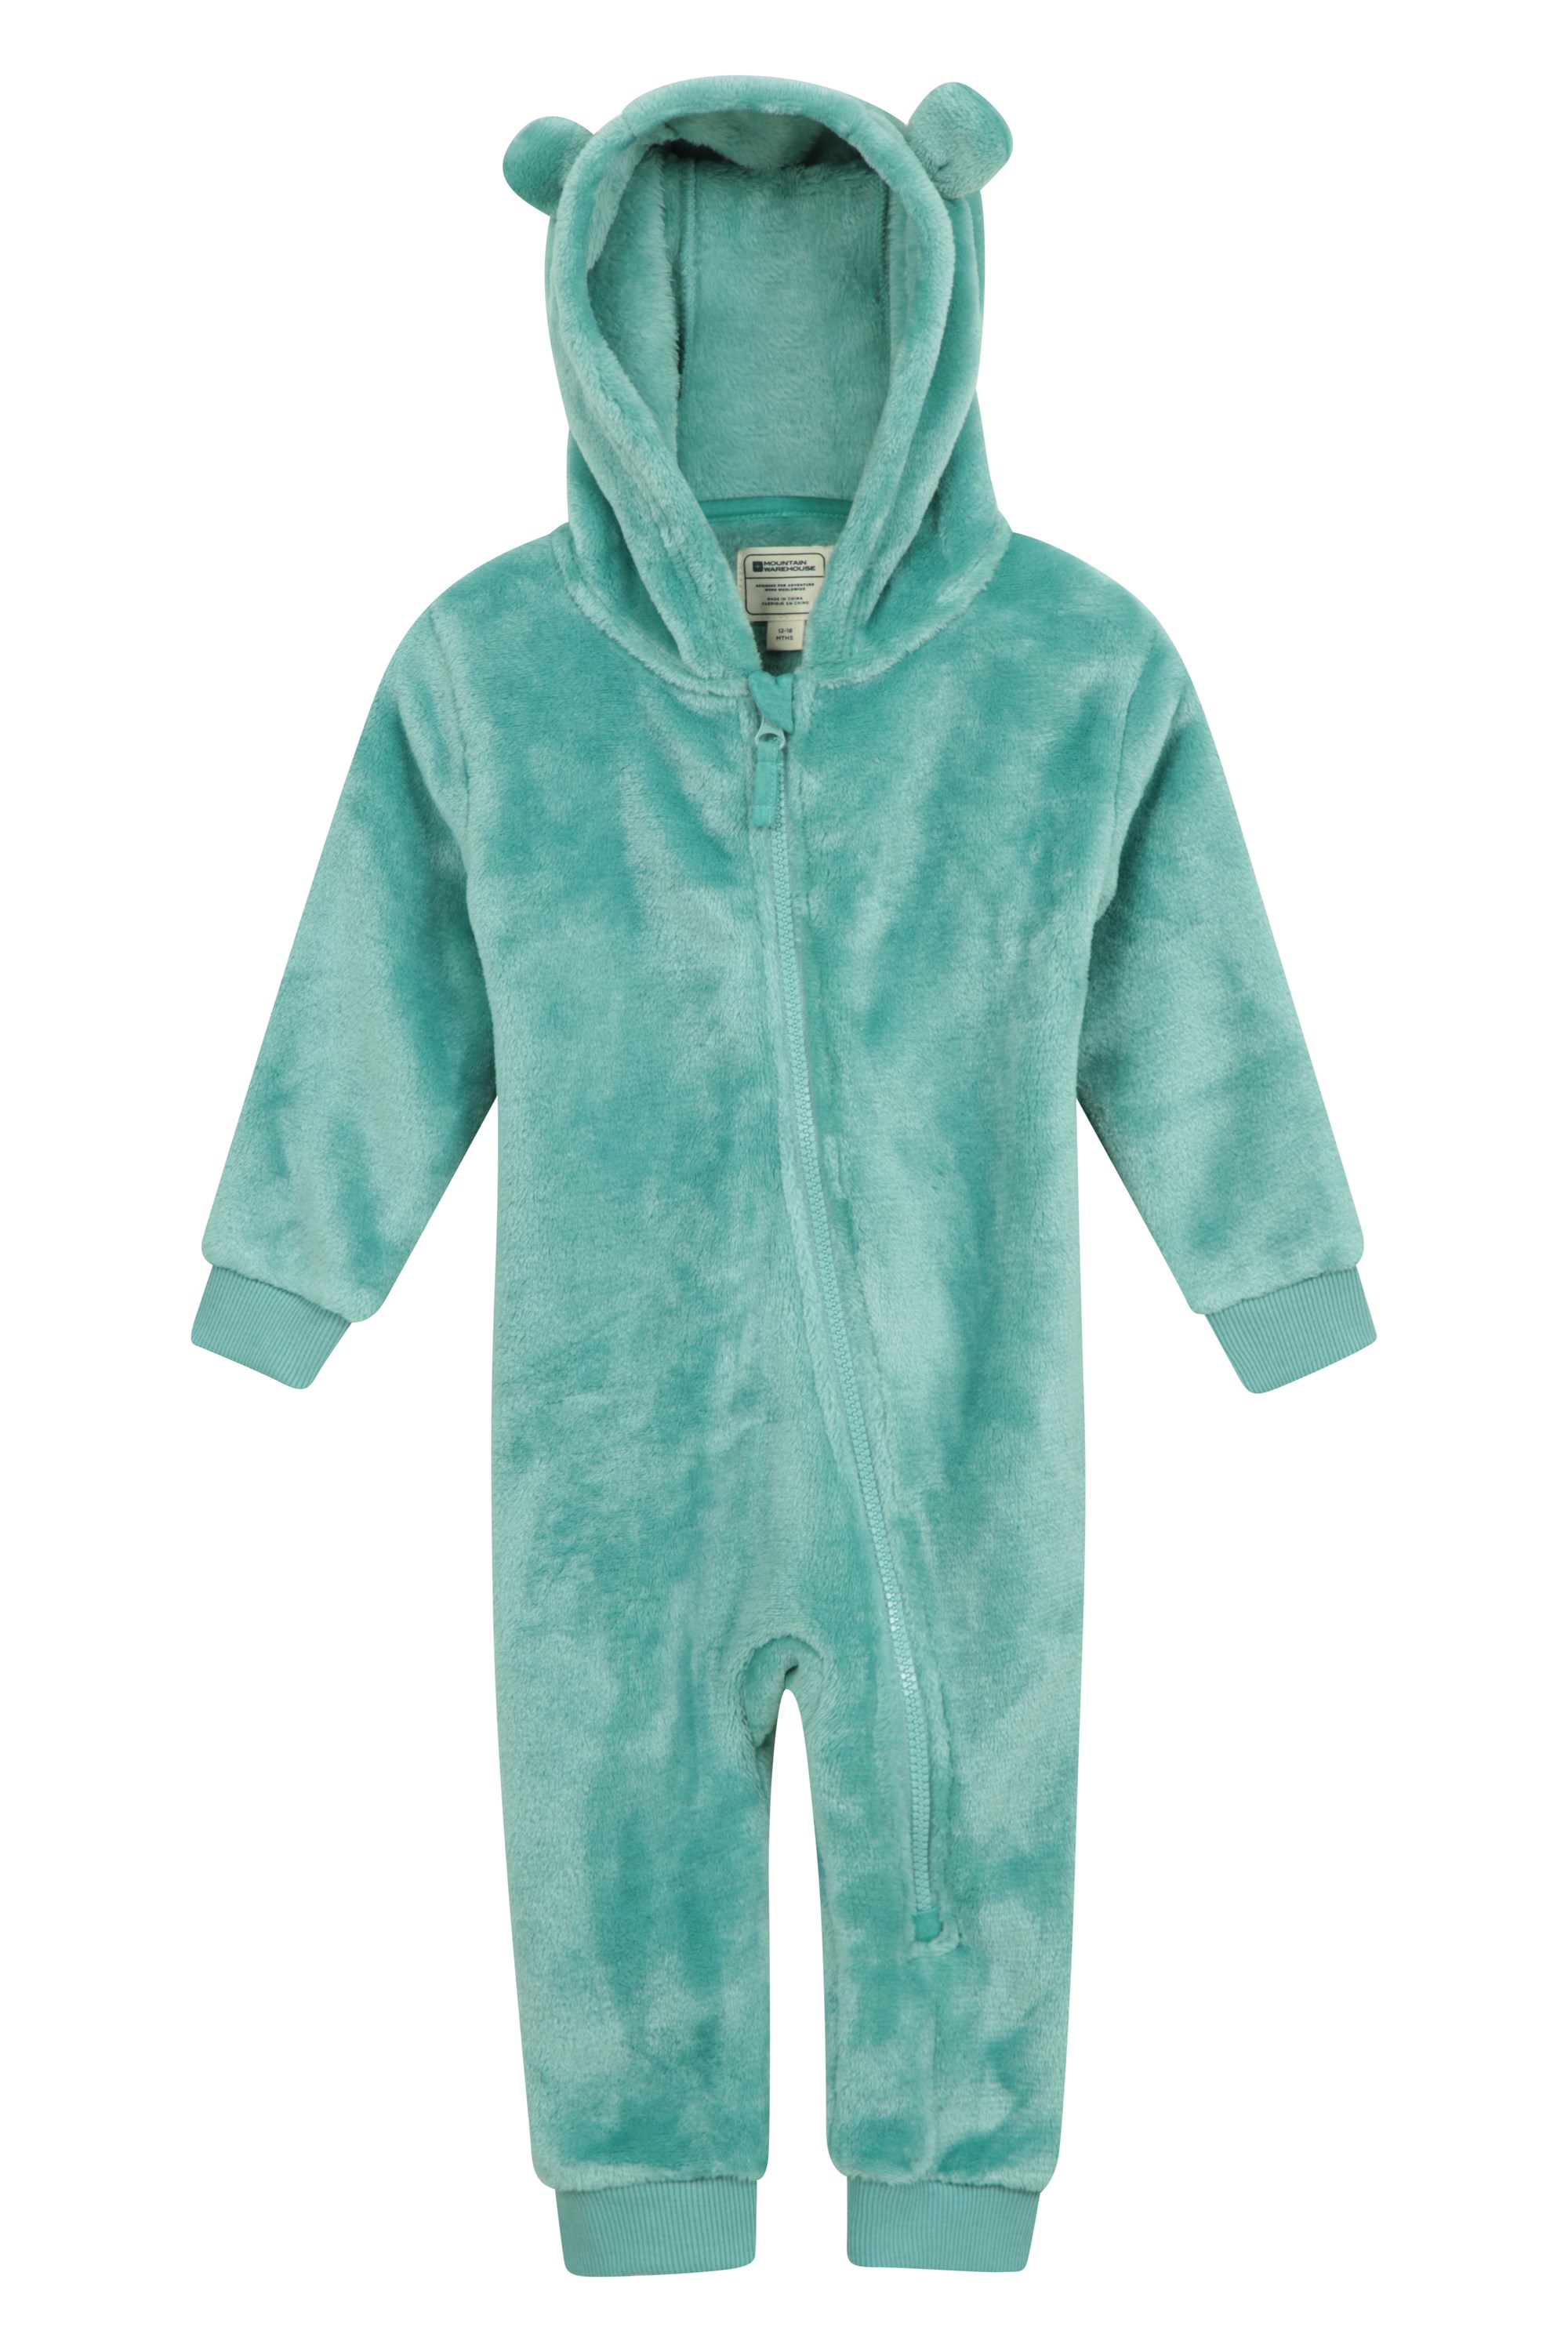 Baby Snuggly All In One - Teal